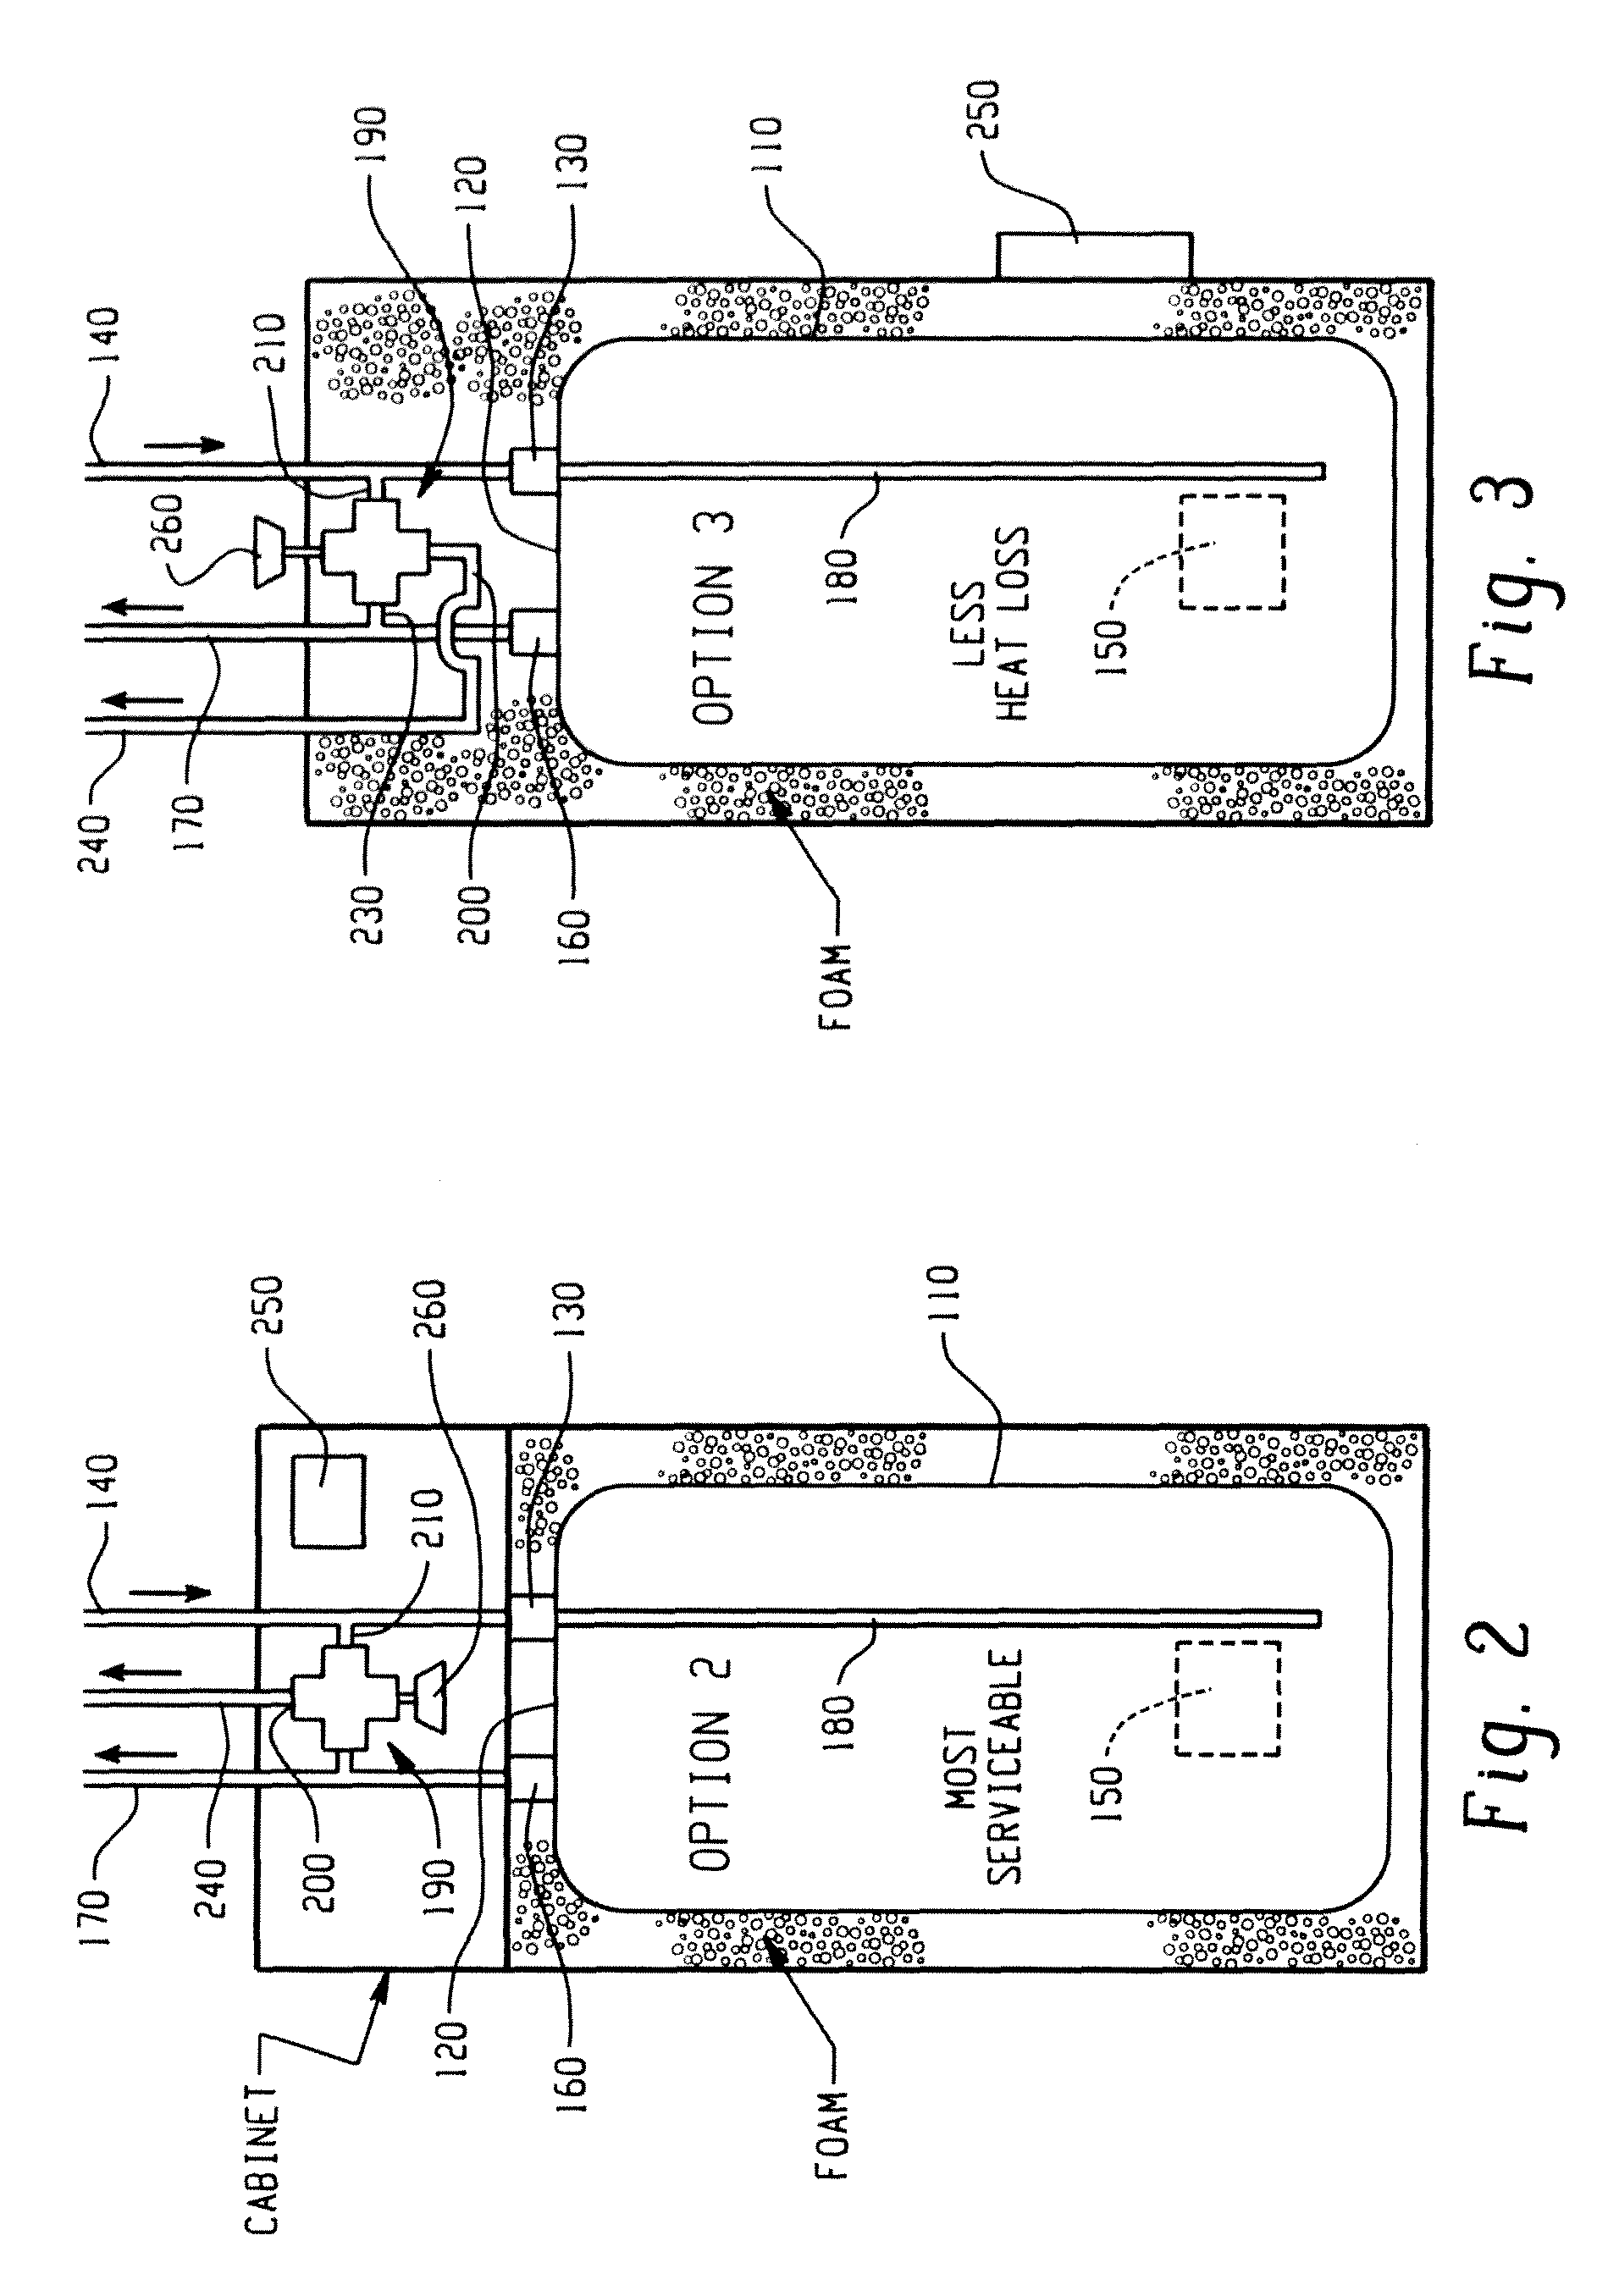 Water heater with integral thermal mixing valve assembly and method